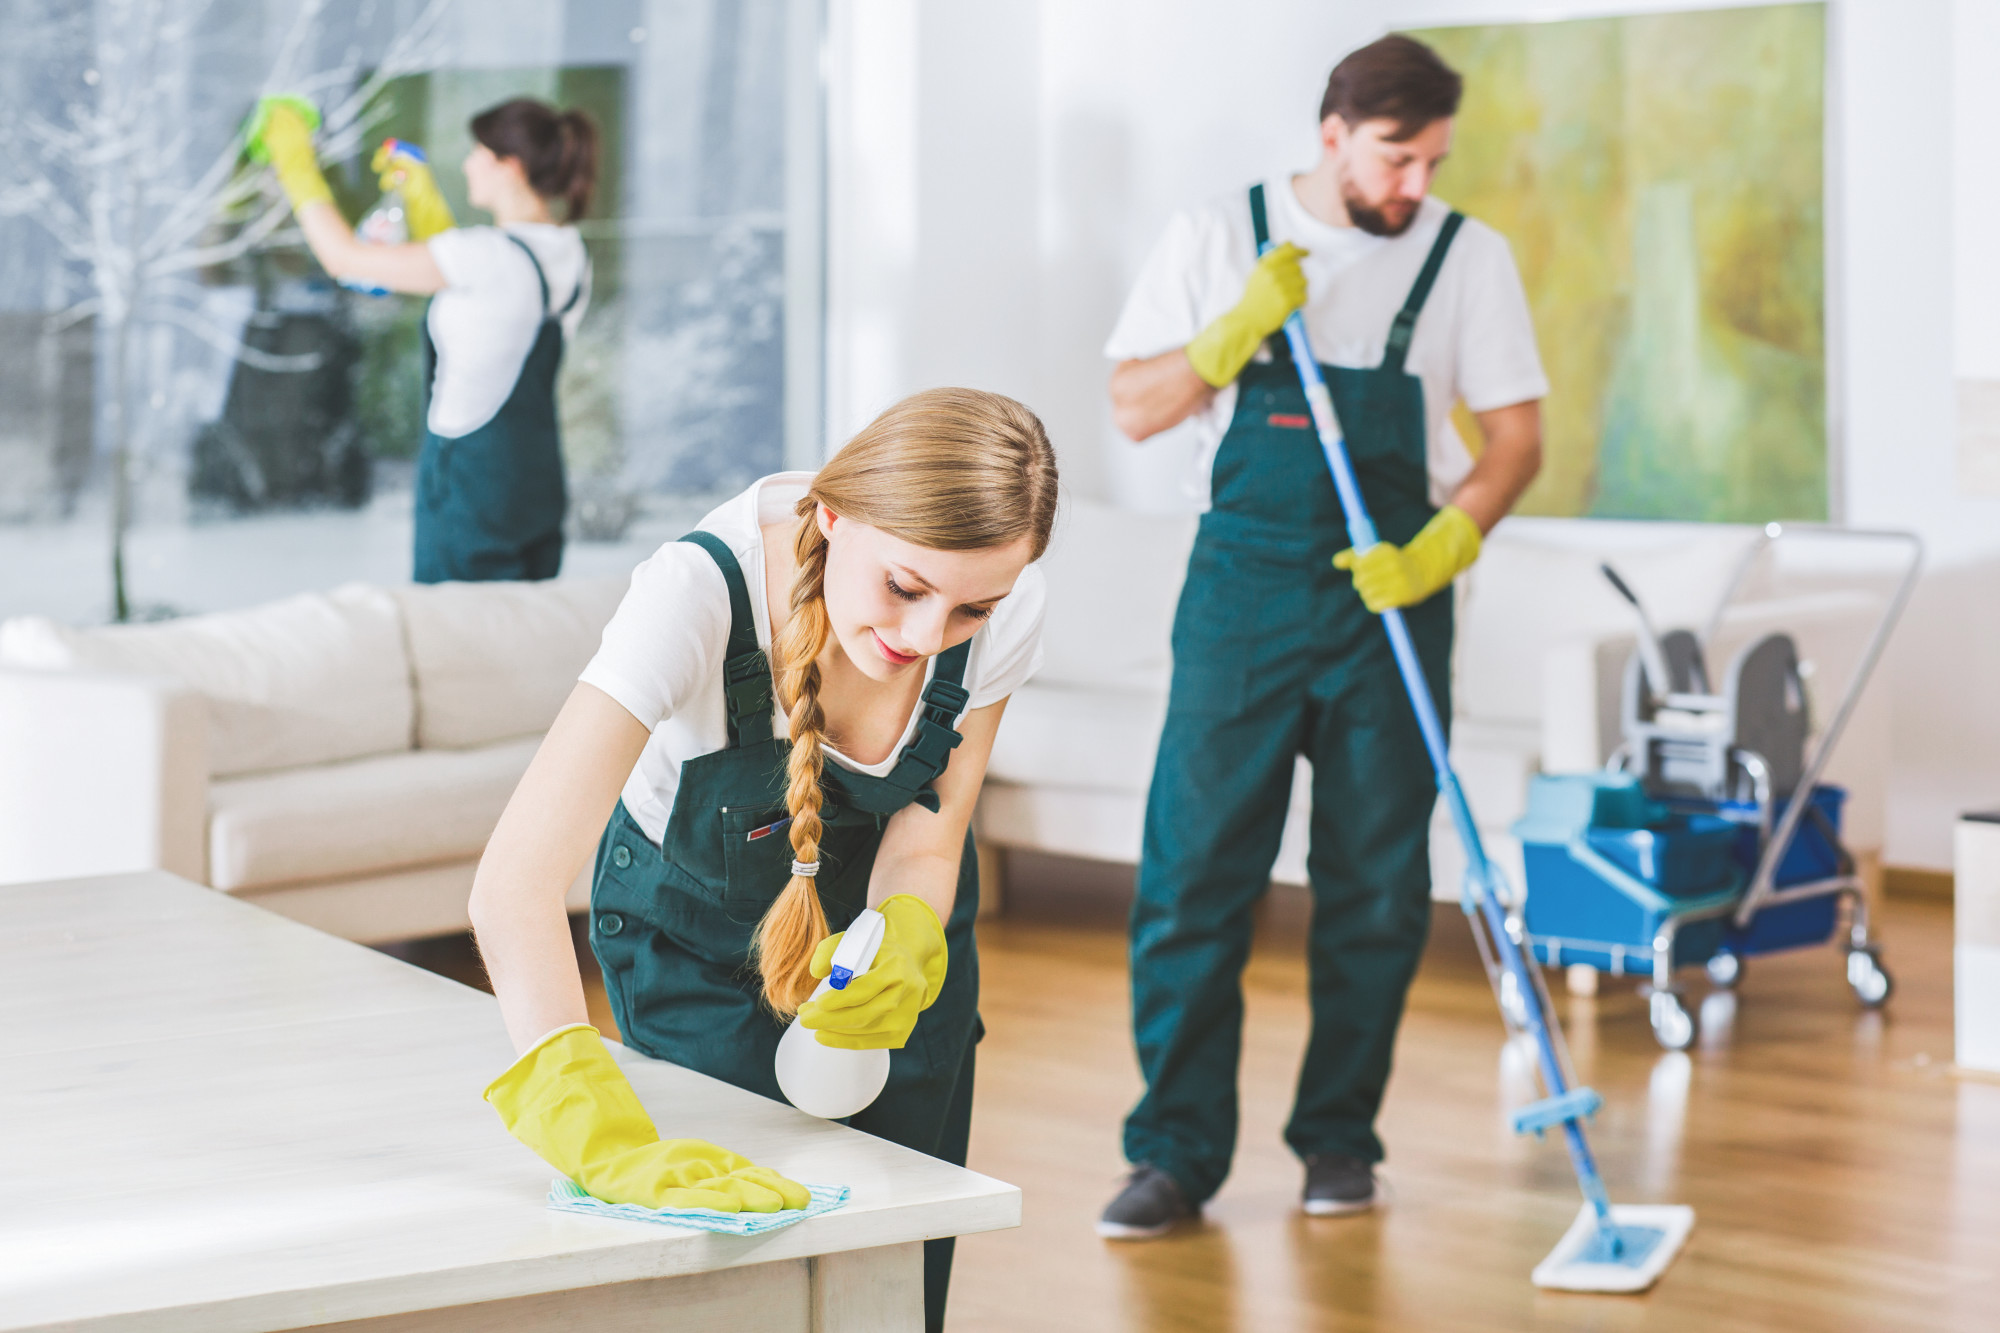 http://bookdirtbusters.com/wp-content/uploads/2019/04/cleaning-services-near-me-1.jpeg